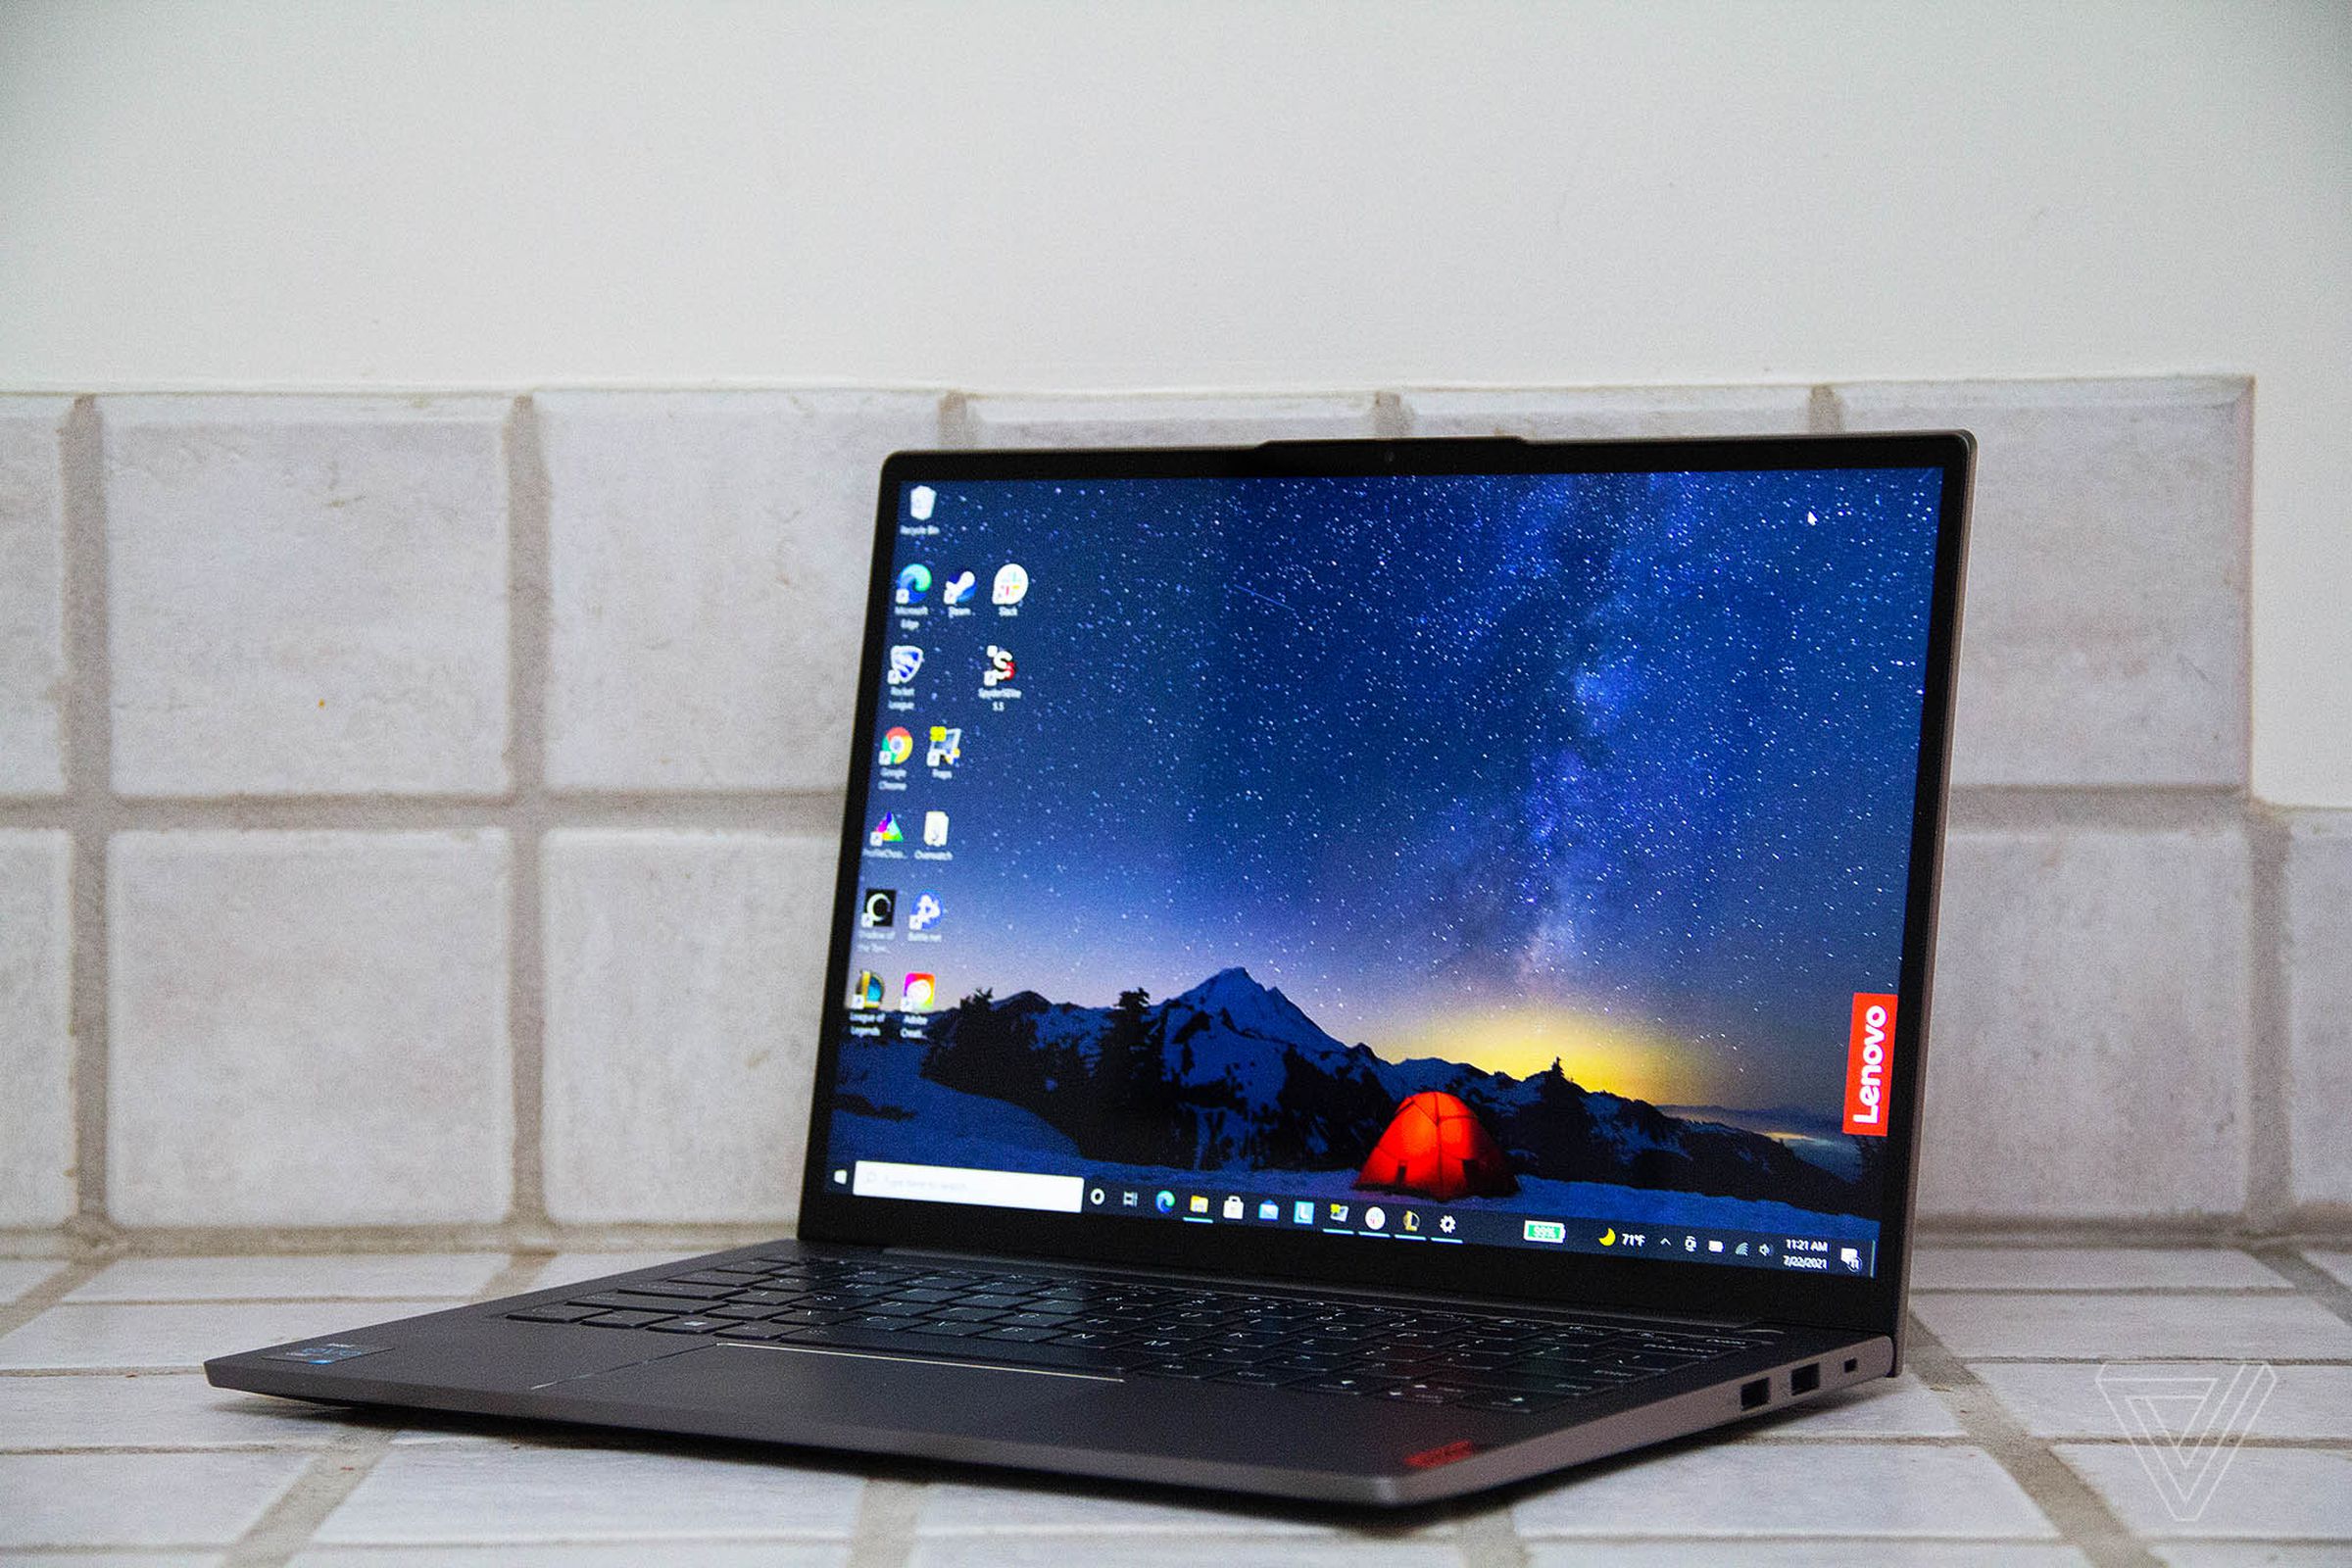 The Lenovo ThinkBook 13s on a white tiled counter, open, angled to the left. The screen displays a night mountain scene with a red tent in the center and the red Lenovo banner on the right side.